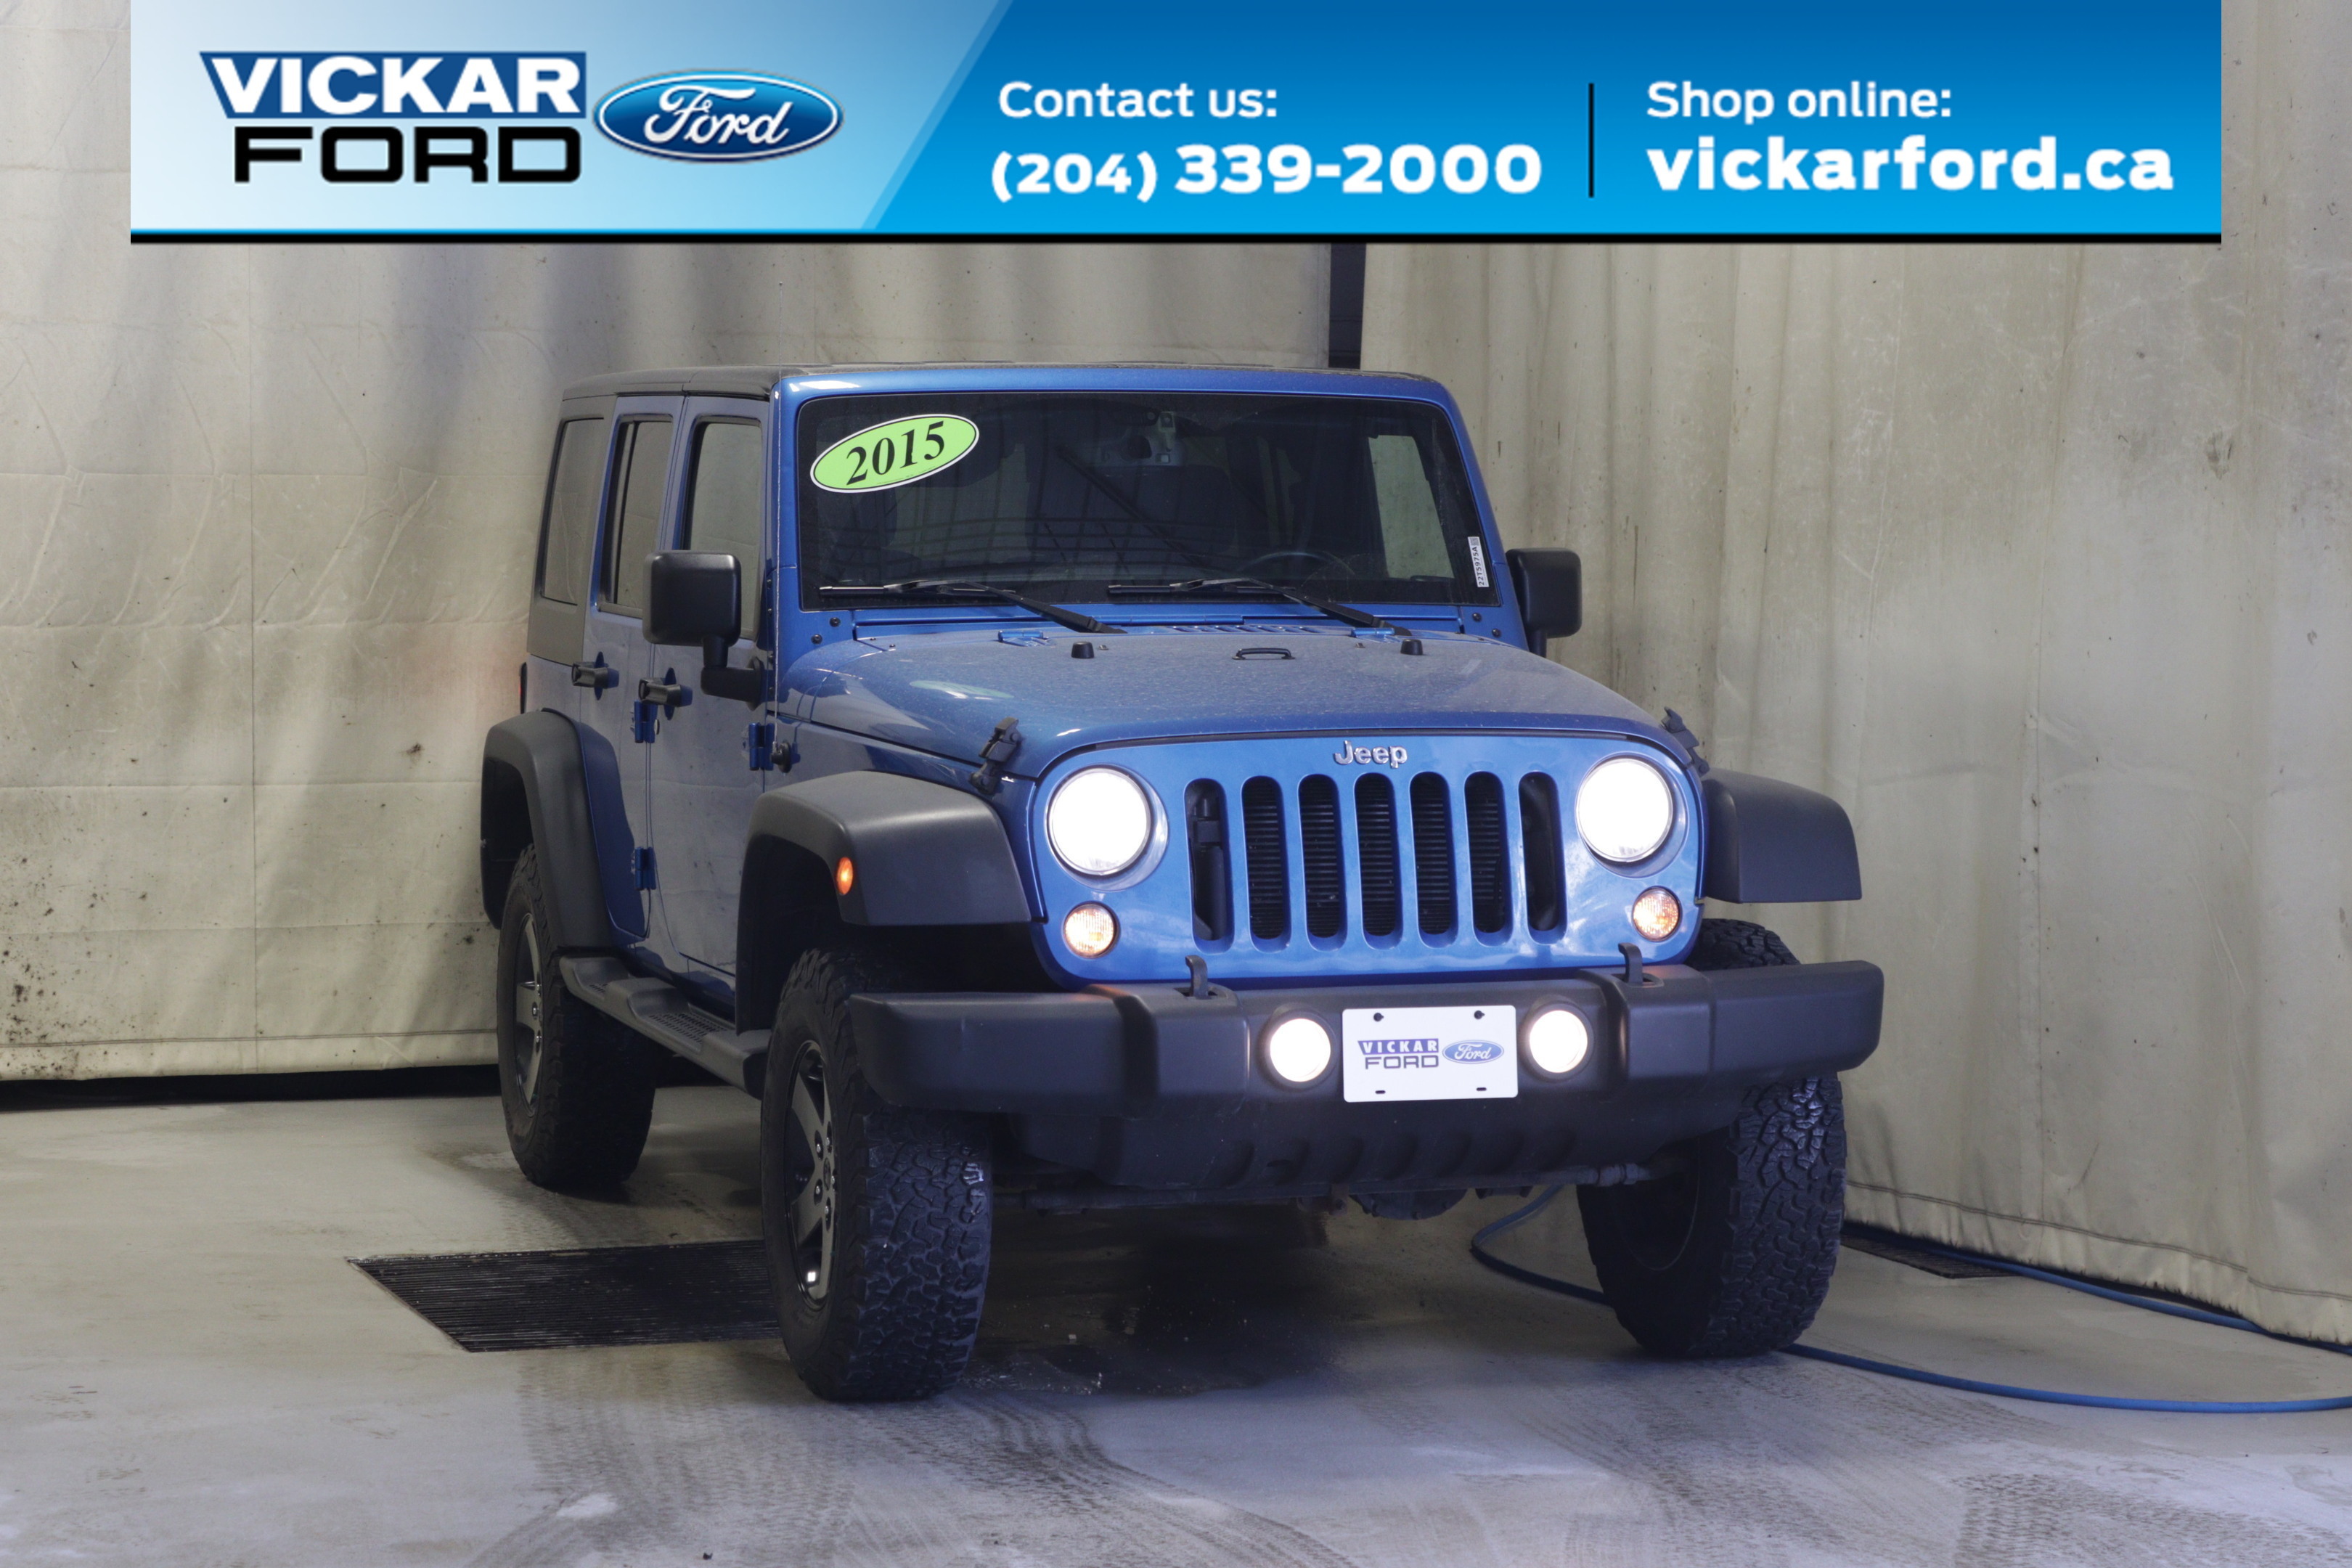 2015 Jeep WRANGLER UNLIMITED Low Km Trade-in Auto Hardtop Painted 4x4   V6 - Winnipeg